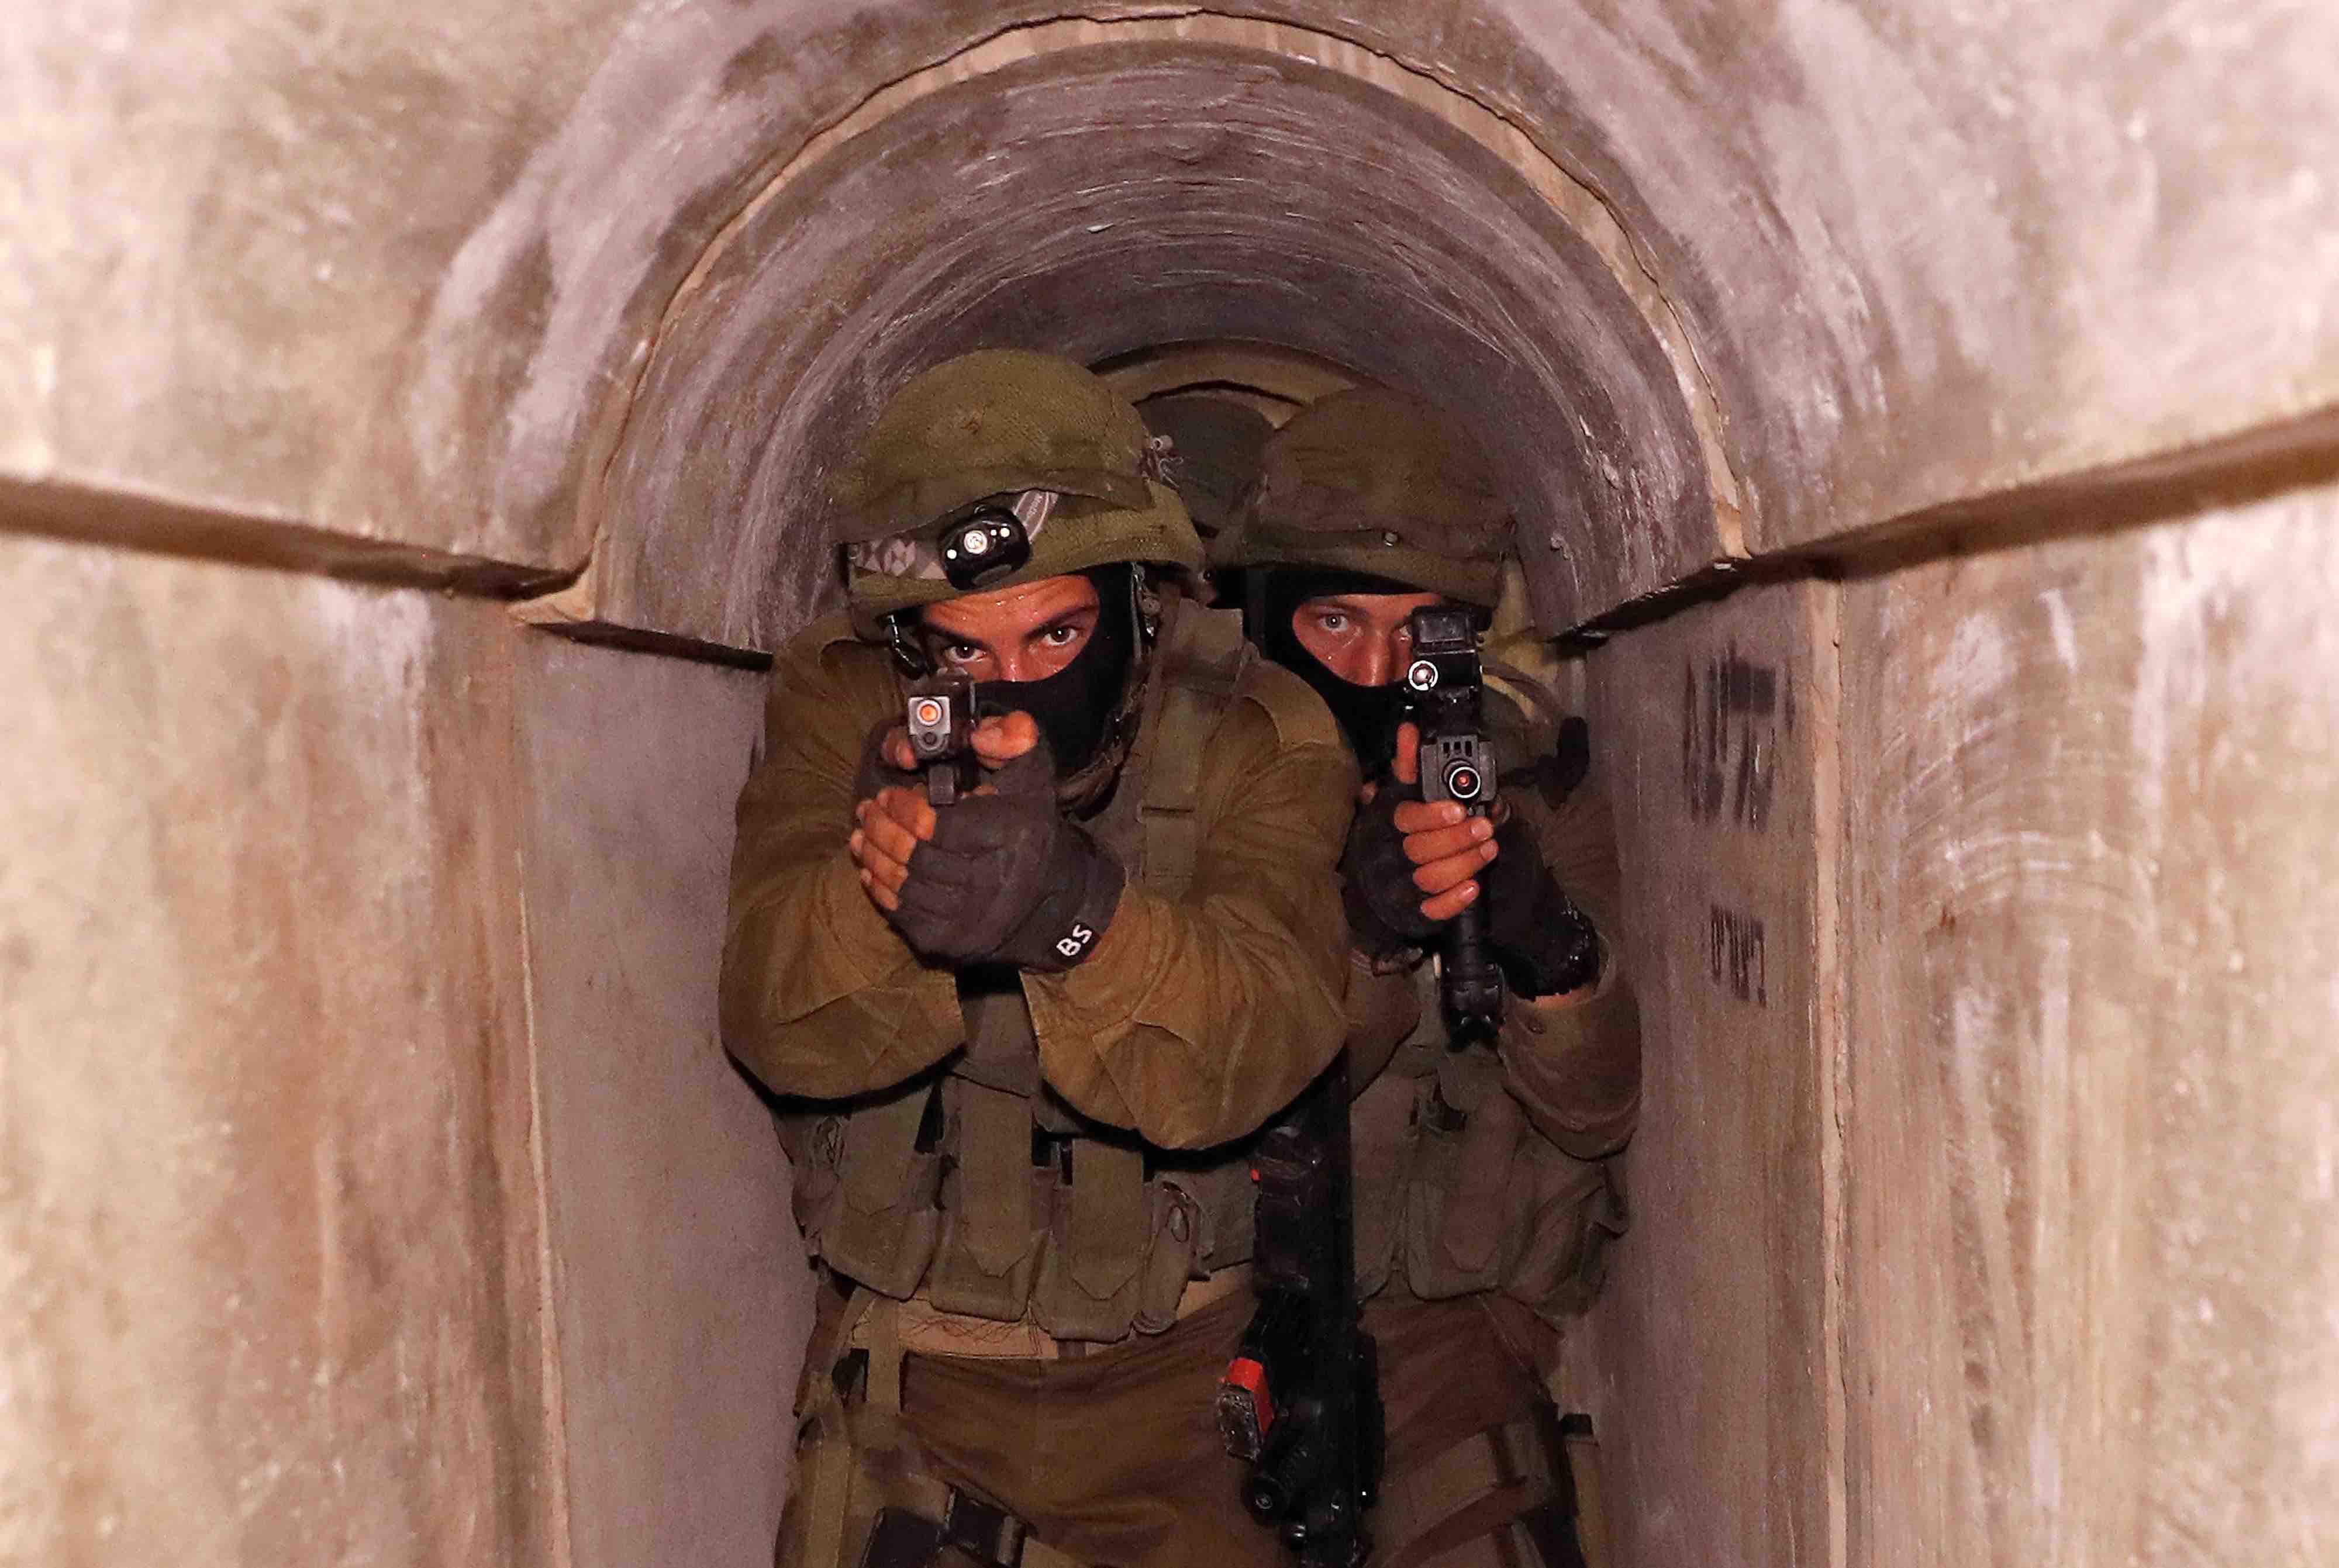 The Hezbollah tunnels exposed by Israel have been digitally scanned and appear on a soldier's headset as they are in reality